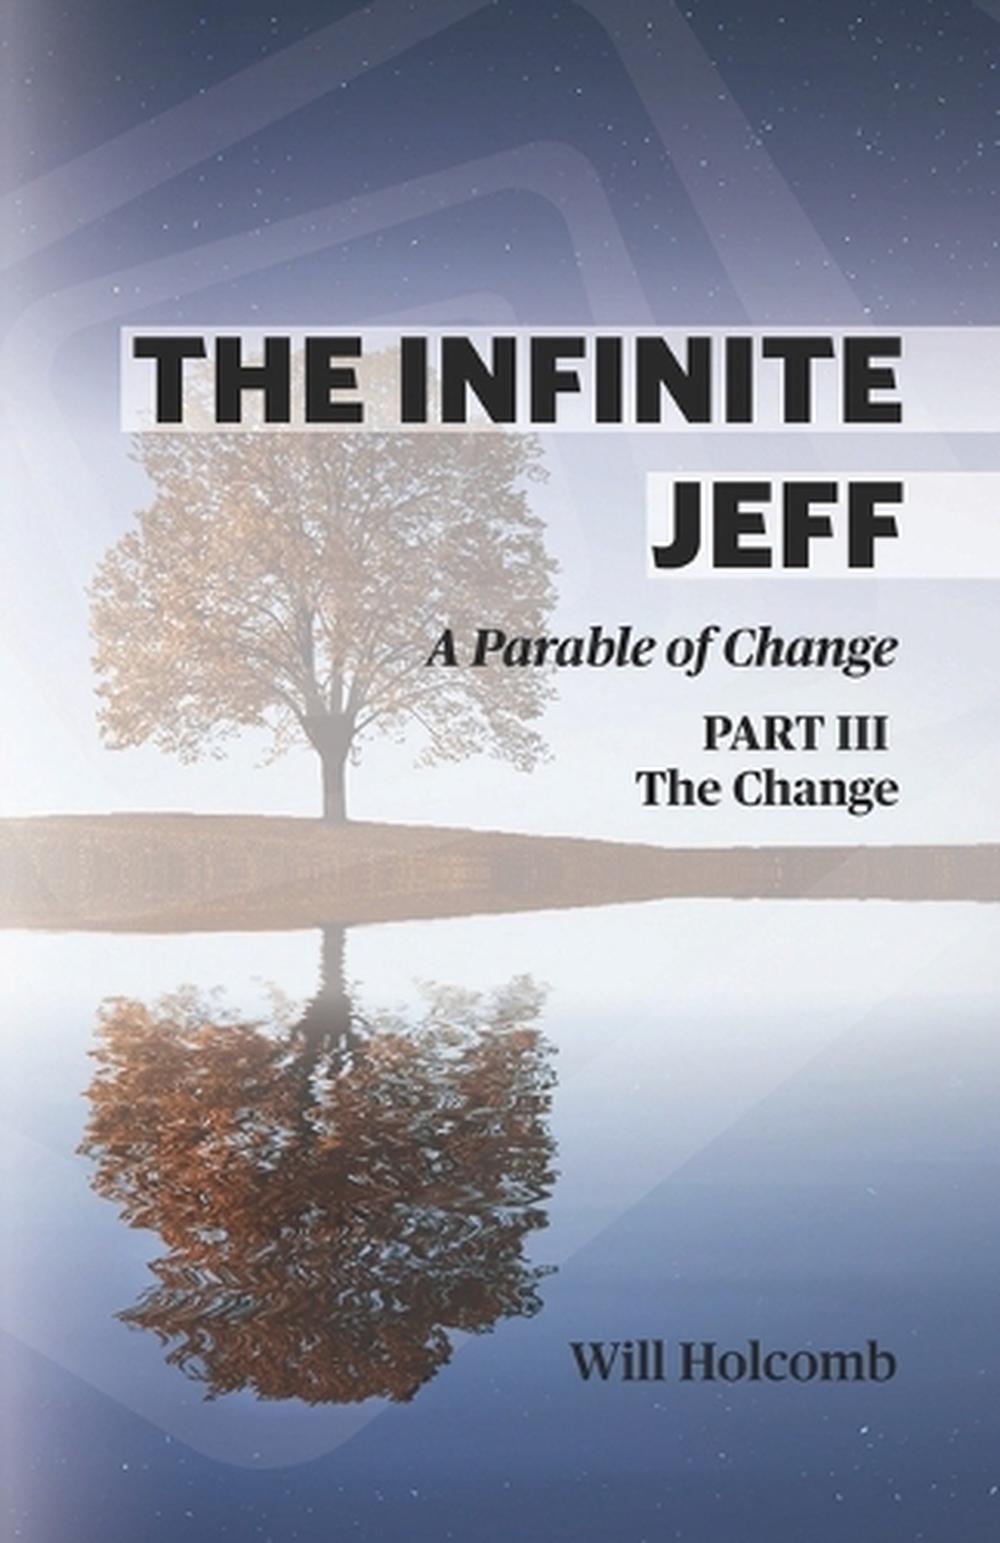 The Infinite Jeff by Will Holcomb